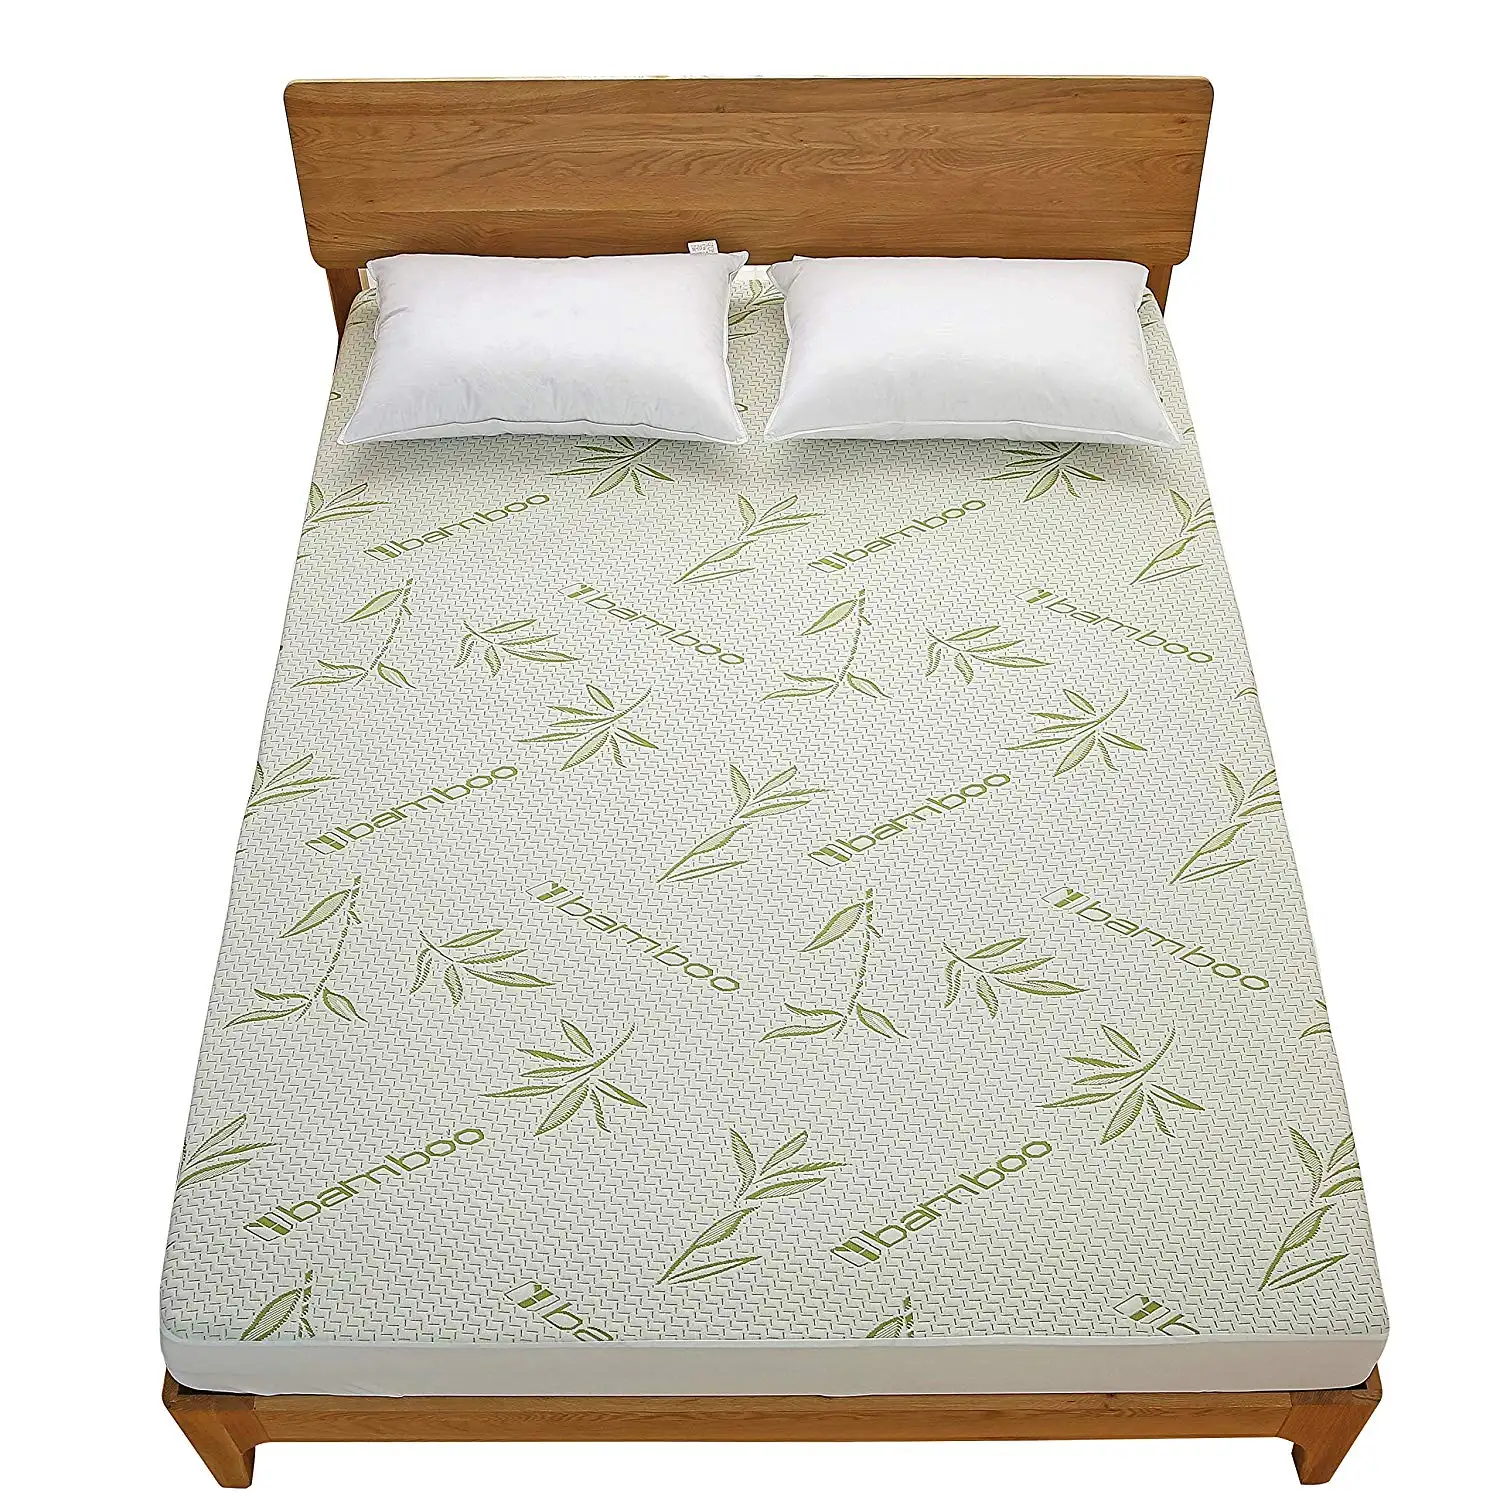 New Fashional Bamboo jacquard cooling mattress protector for home use